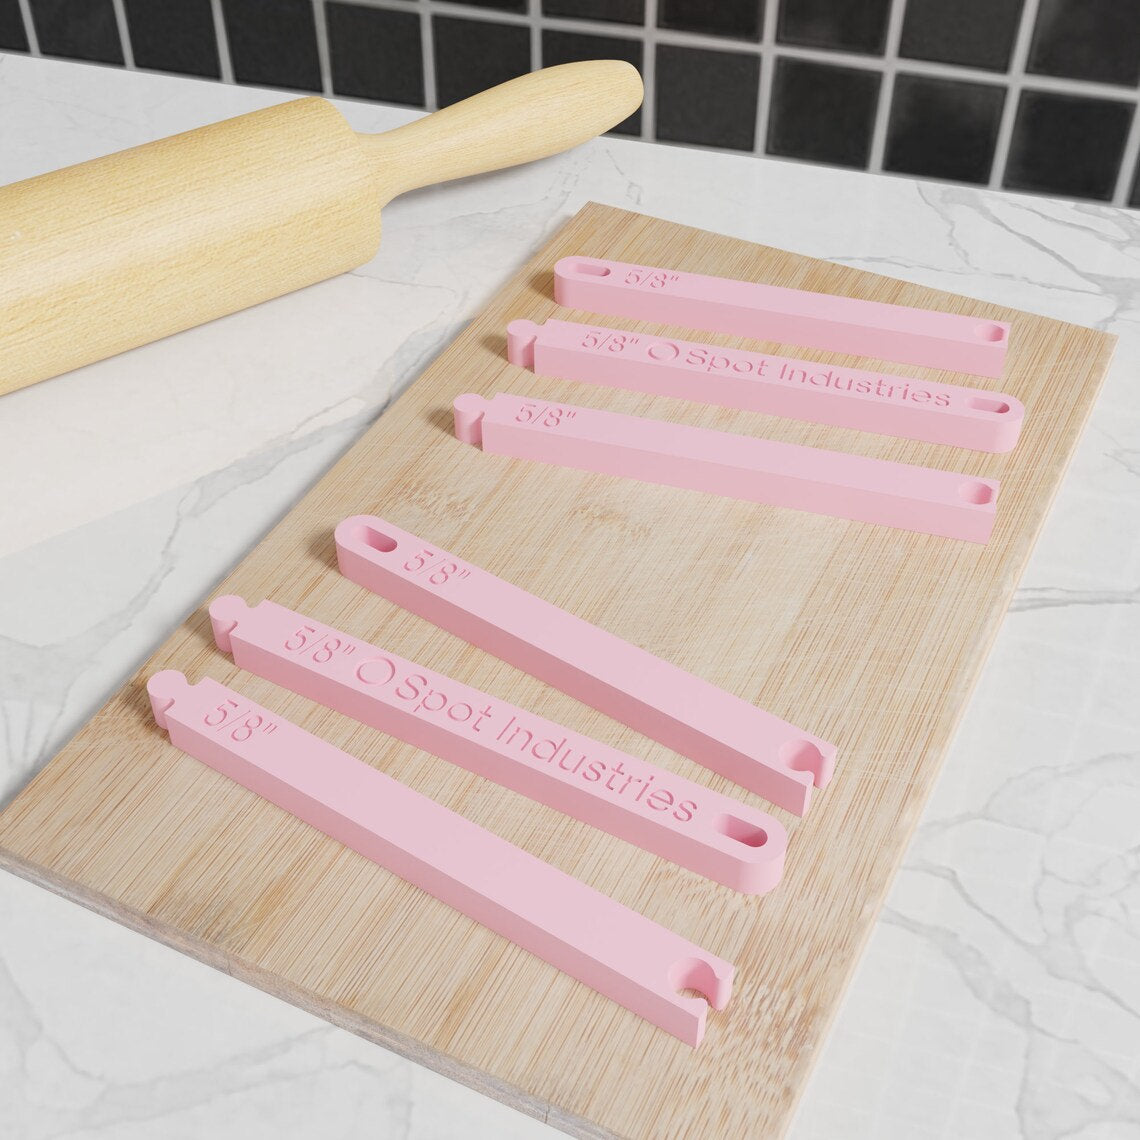 Extra Long Dough Sticks Metric in 16mm Thickness. Get The Perfect Dough Height Every Time With Our Extra Long Dough Sticks